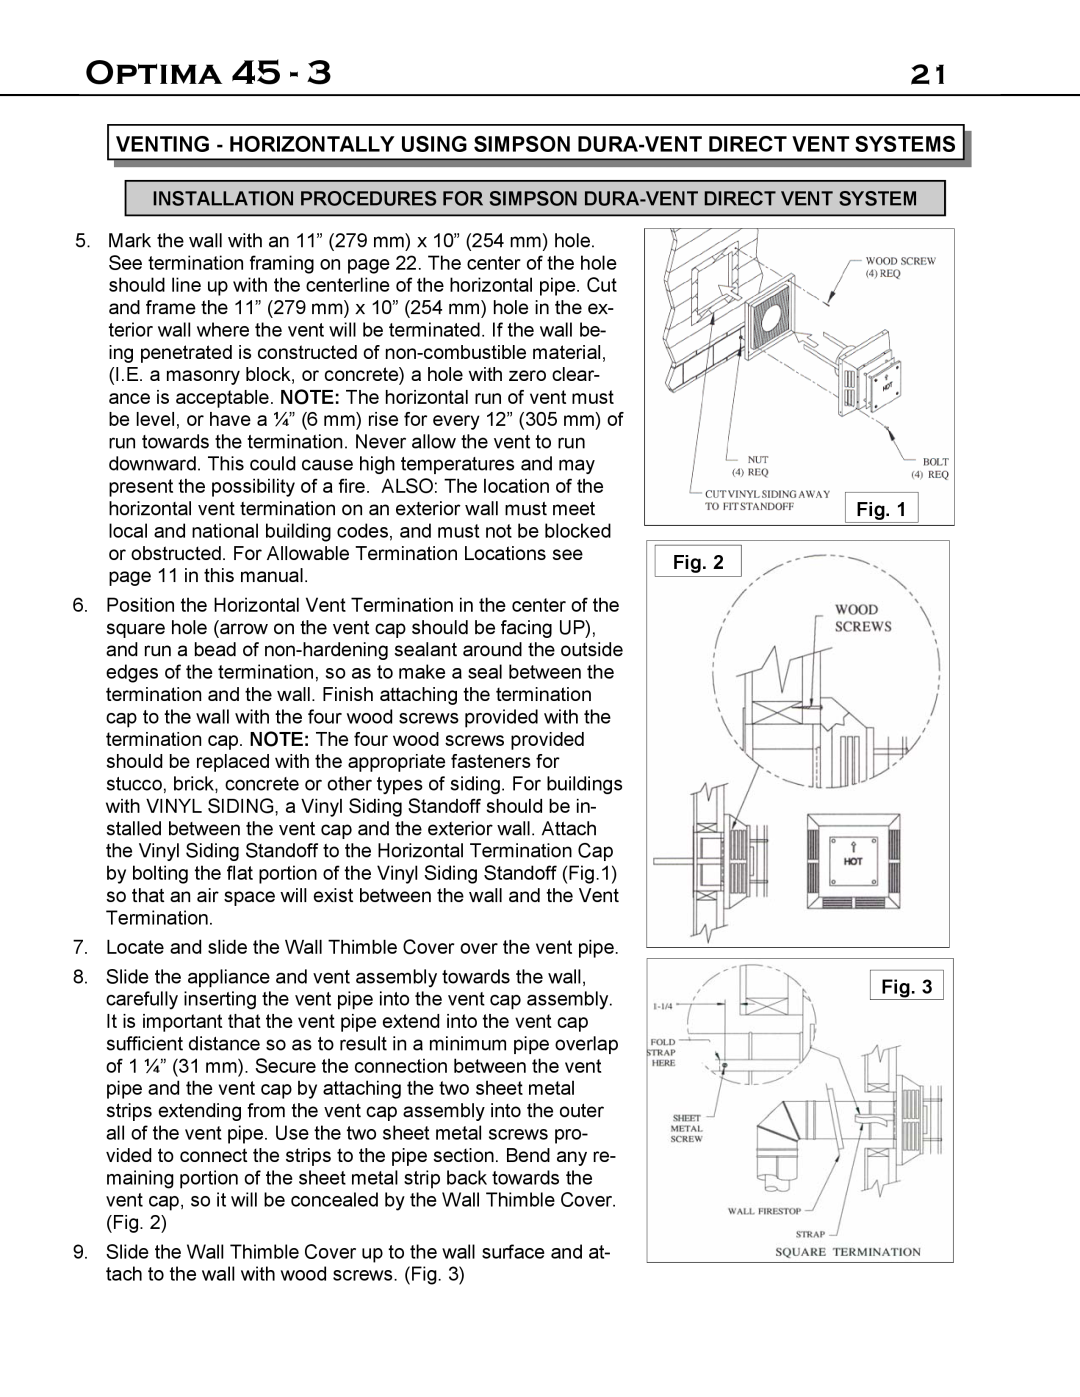 Optima Company 45 - 3 Optima, page 11 in this manual 